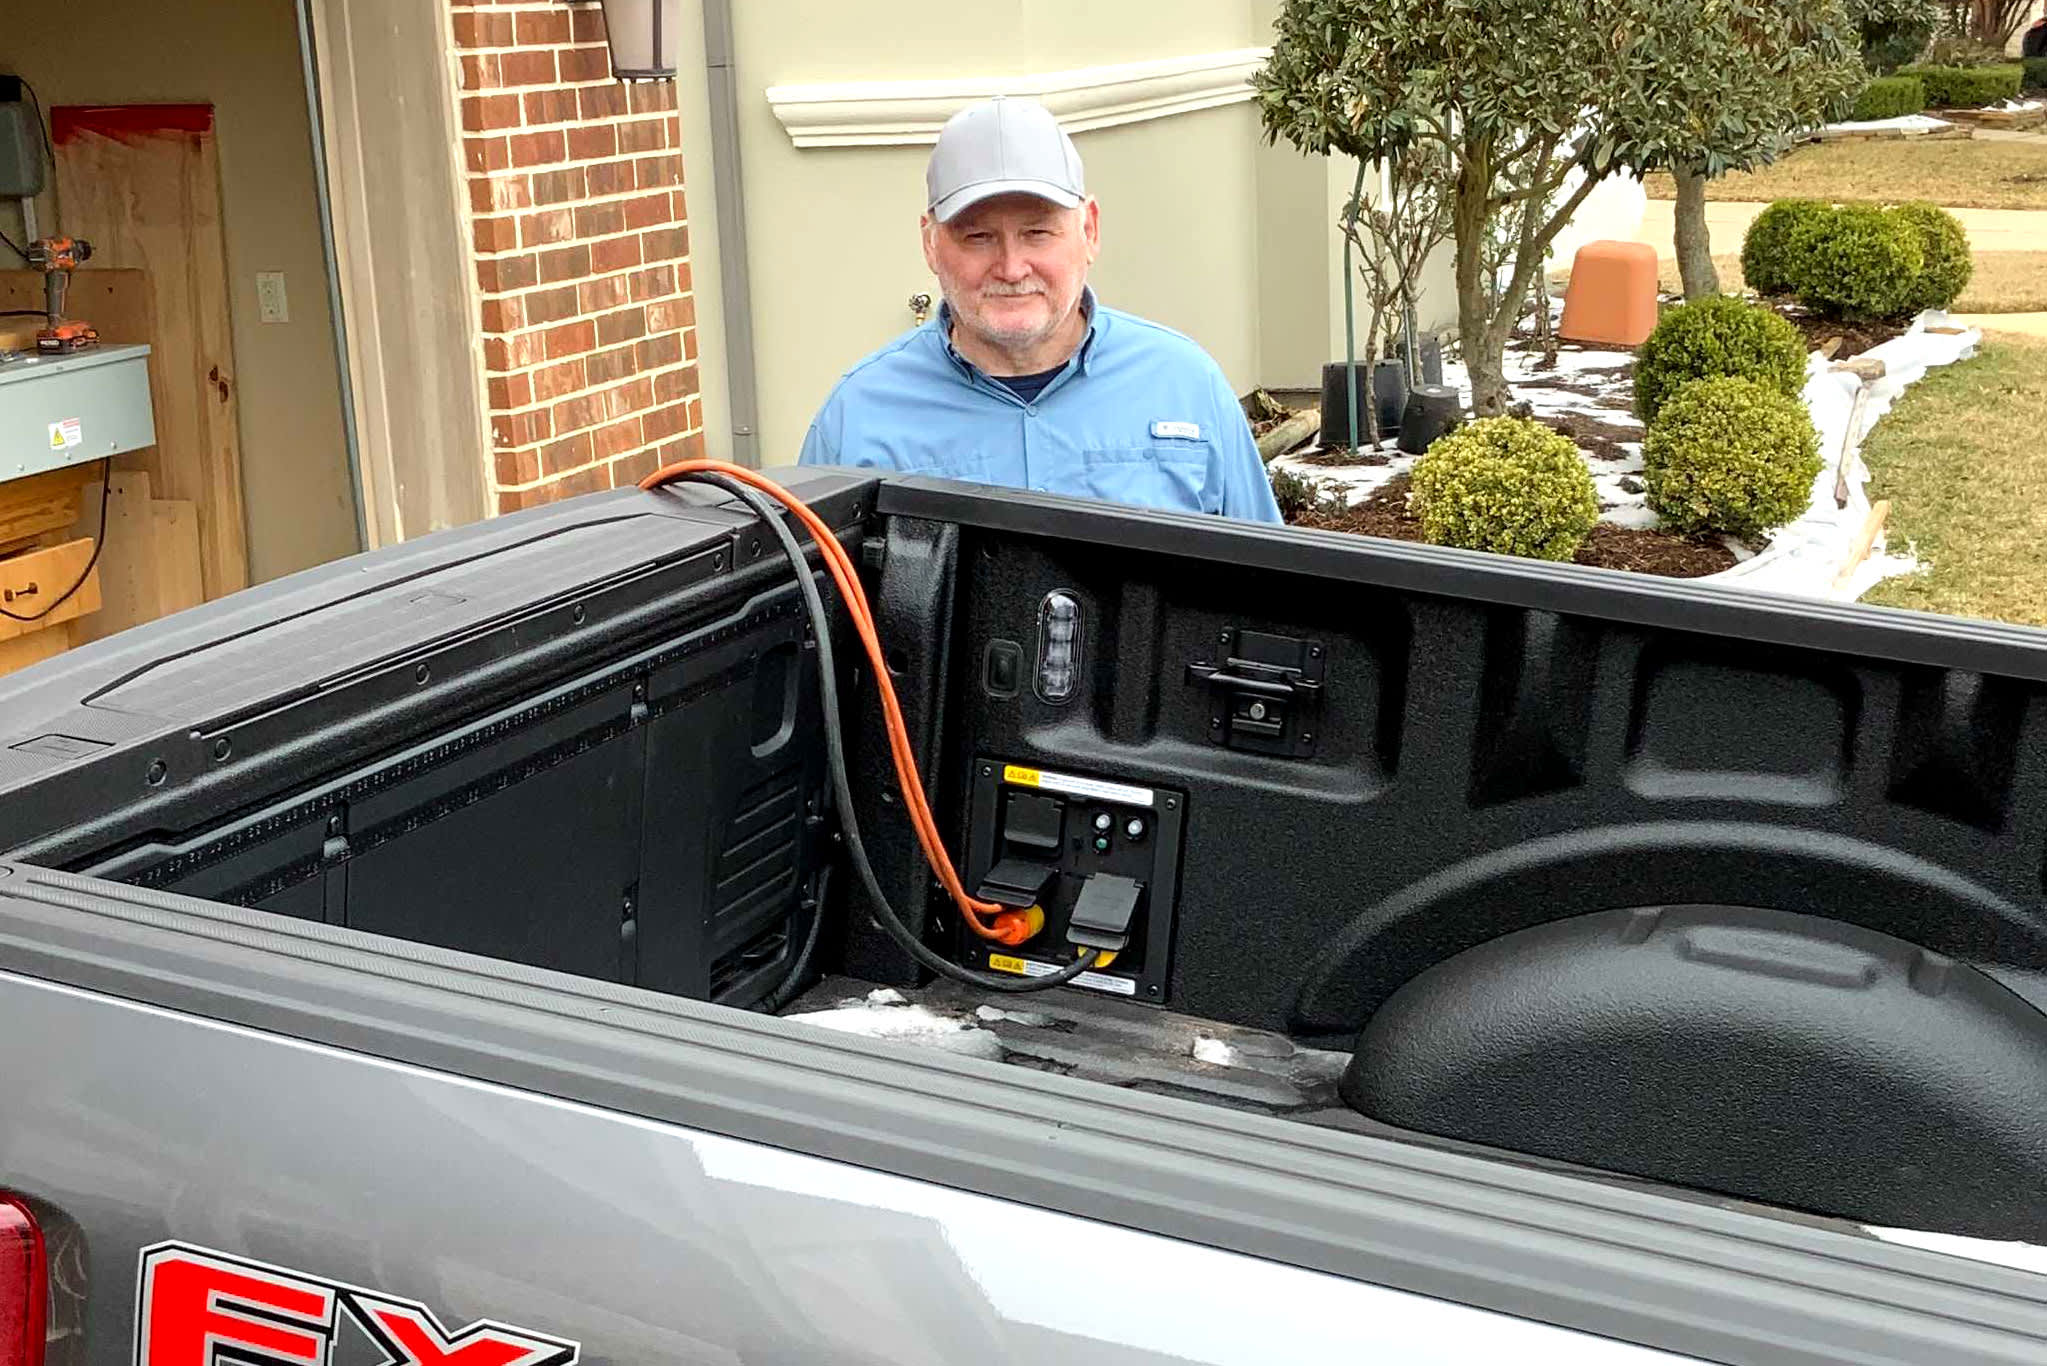 Some use Ford F-150 hybrids for power houses